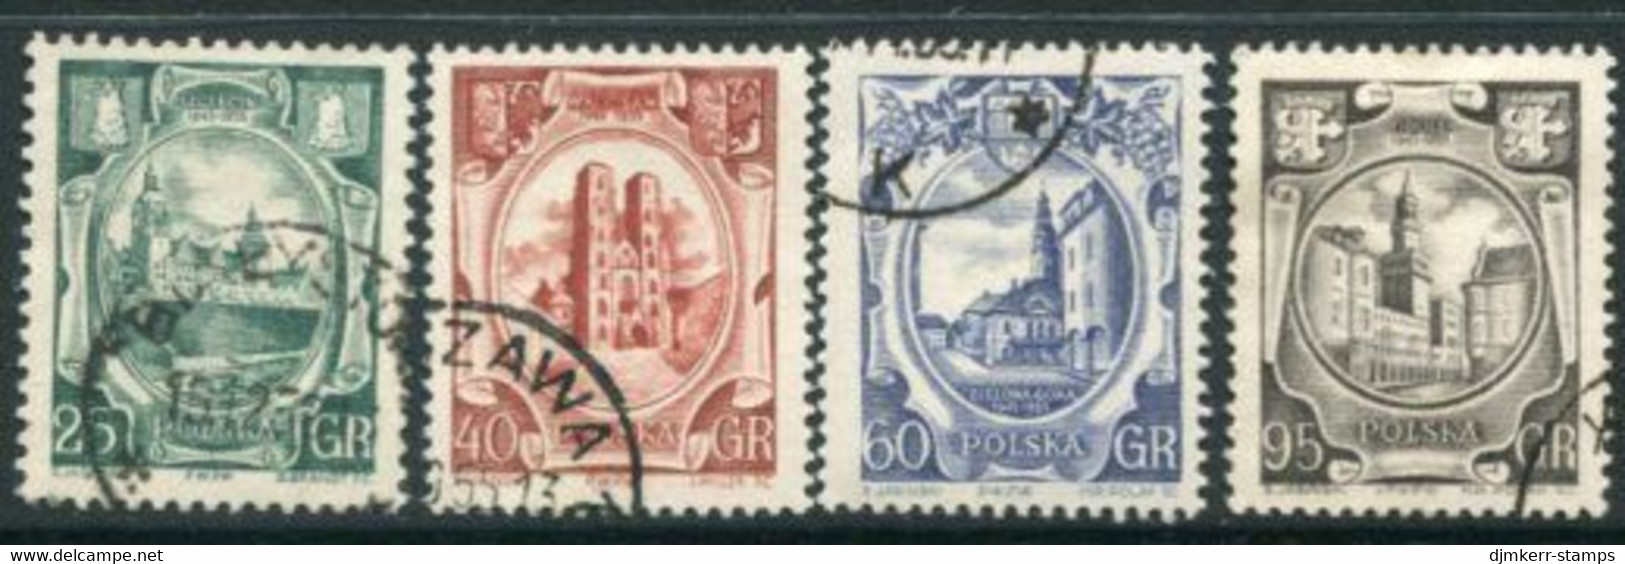 POLAND 1955 Incorporation Of Western Territories Used  Michel 942-45 - Used Stamps